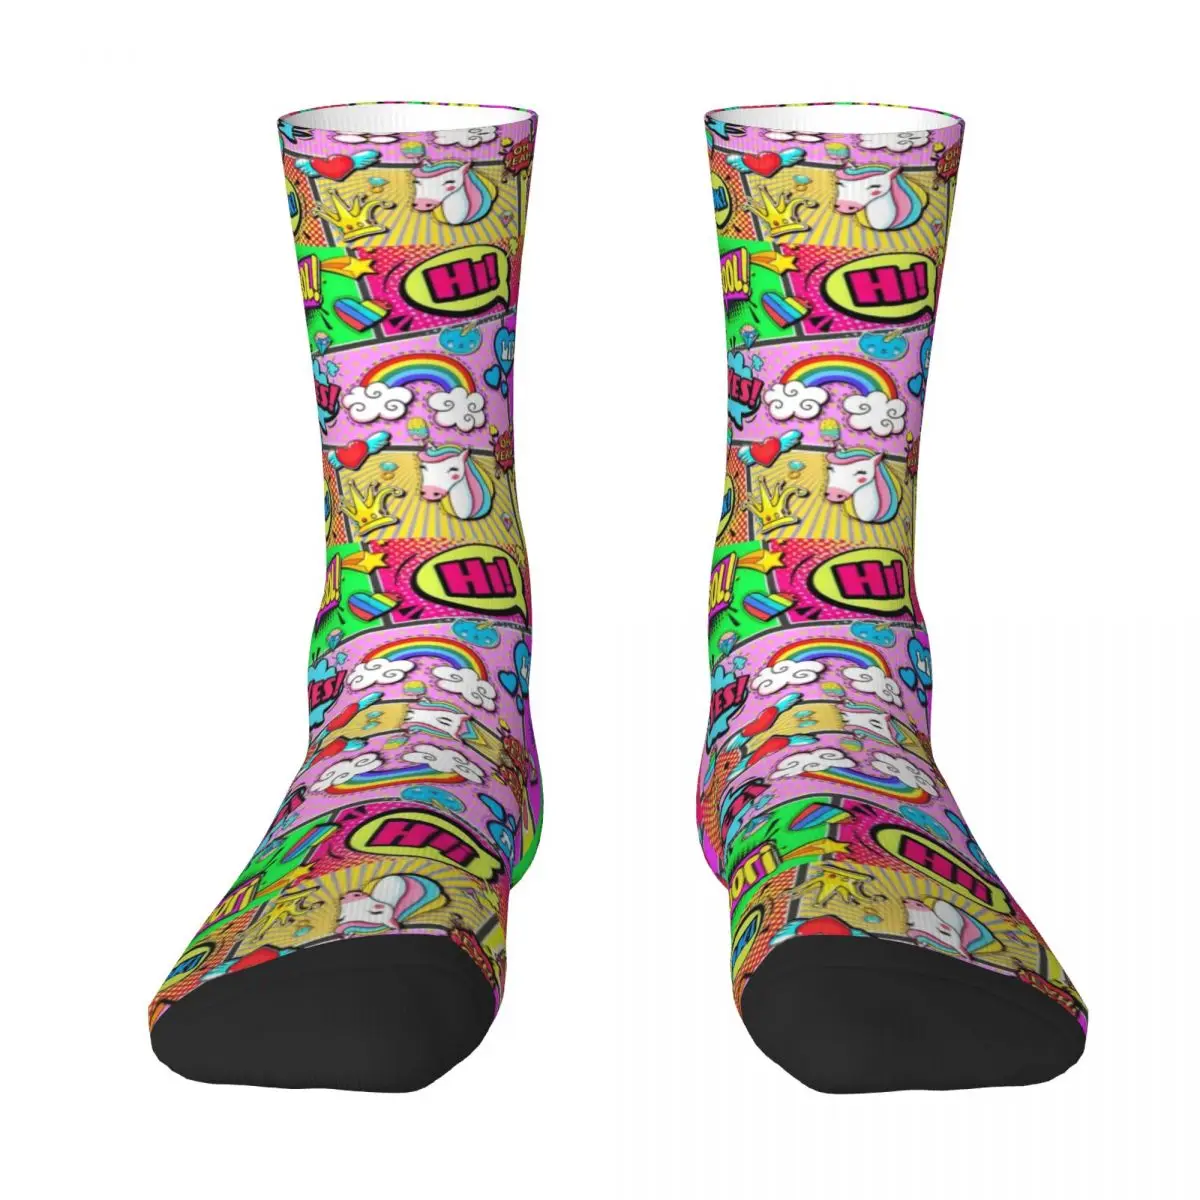 

Graphic Panels Crazy Colorful Girly Comic Book Pop Art Adult Socks The Best Buy Blanket roll Compression Socks Cool